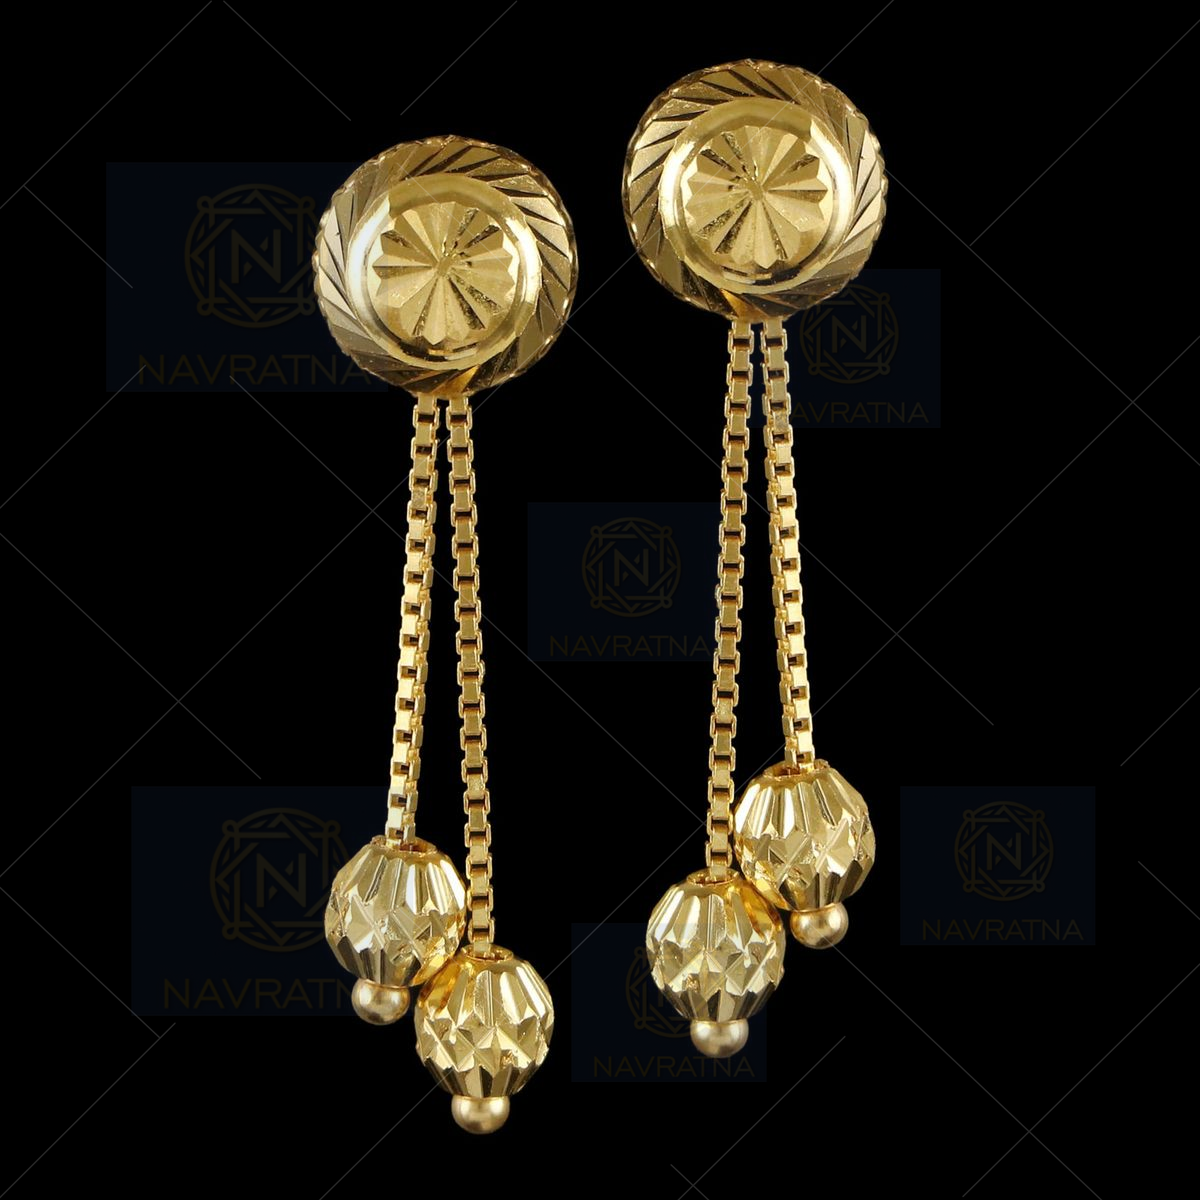 Most Beautiful Gold Long Drop Earrings Designs Collection For Ladies | P...  | Diamond hand bracelet, Long drop earrings, New gold jewellery designs